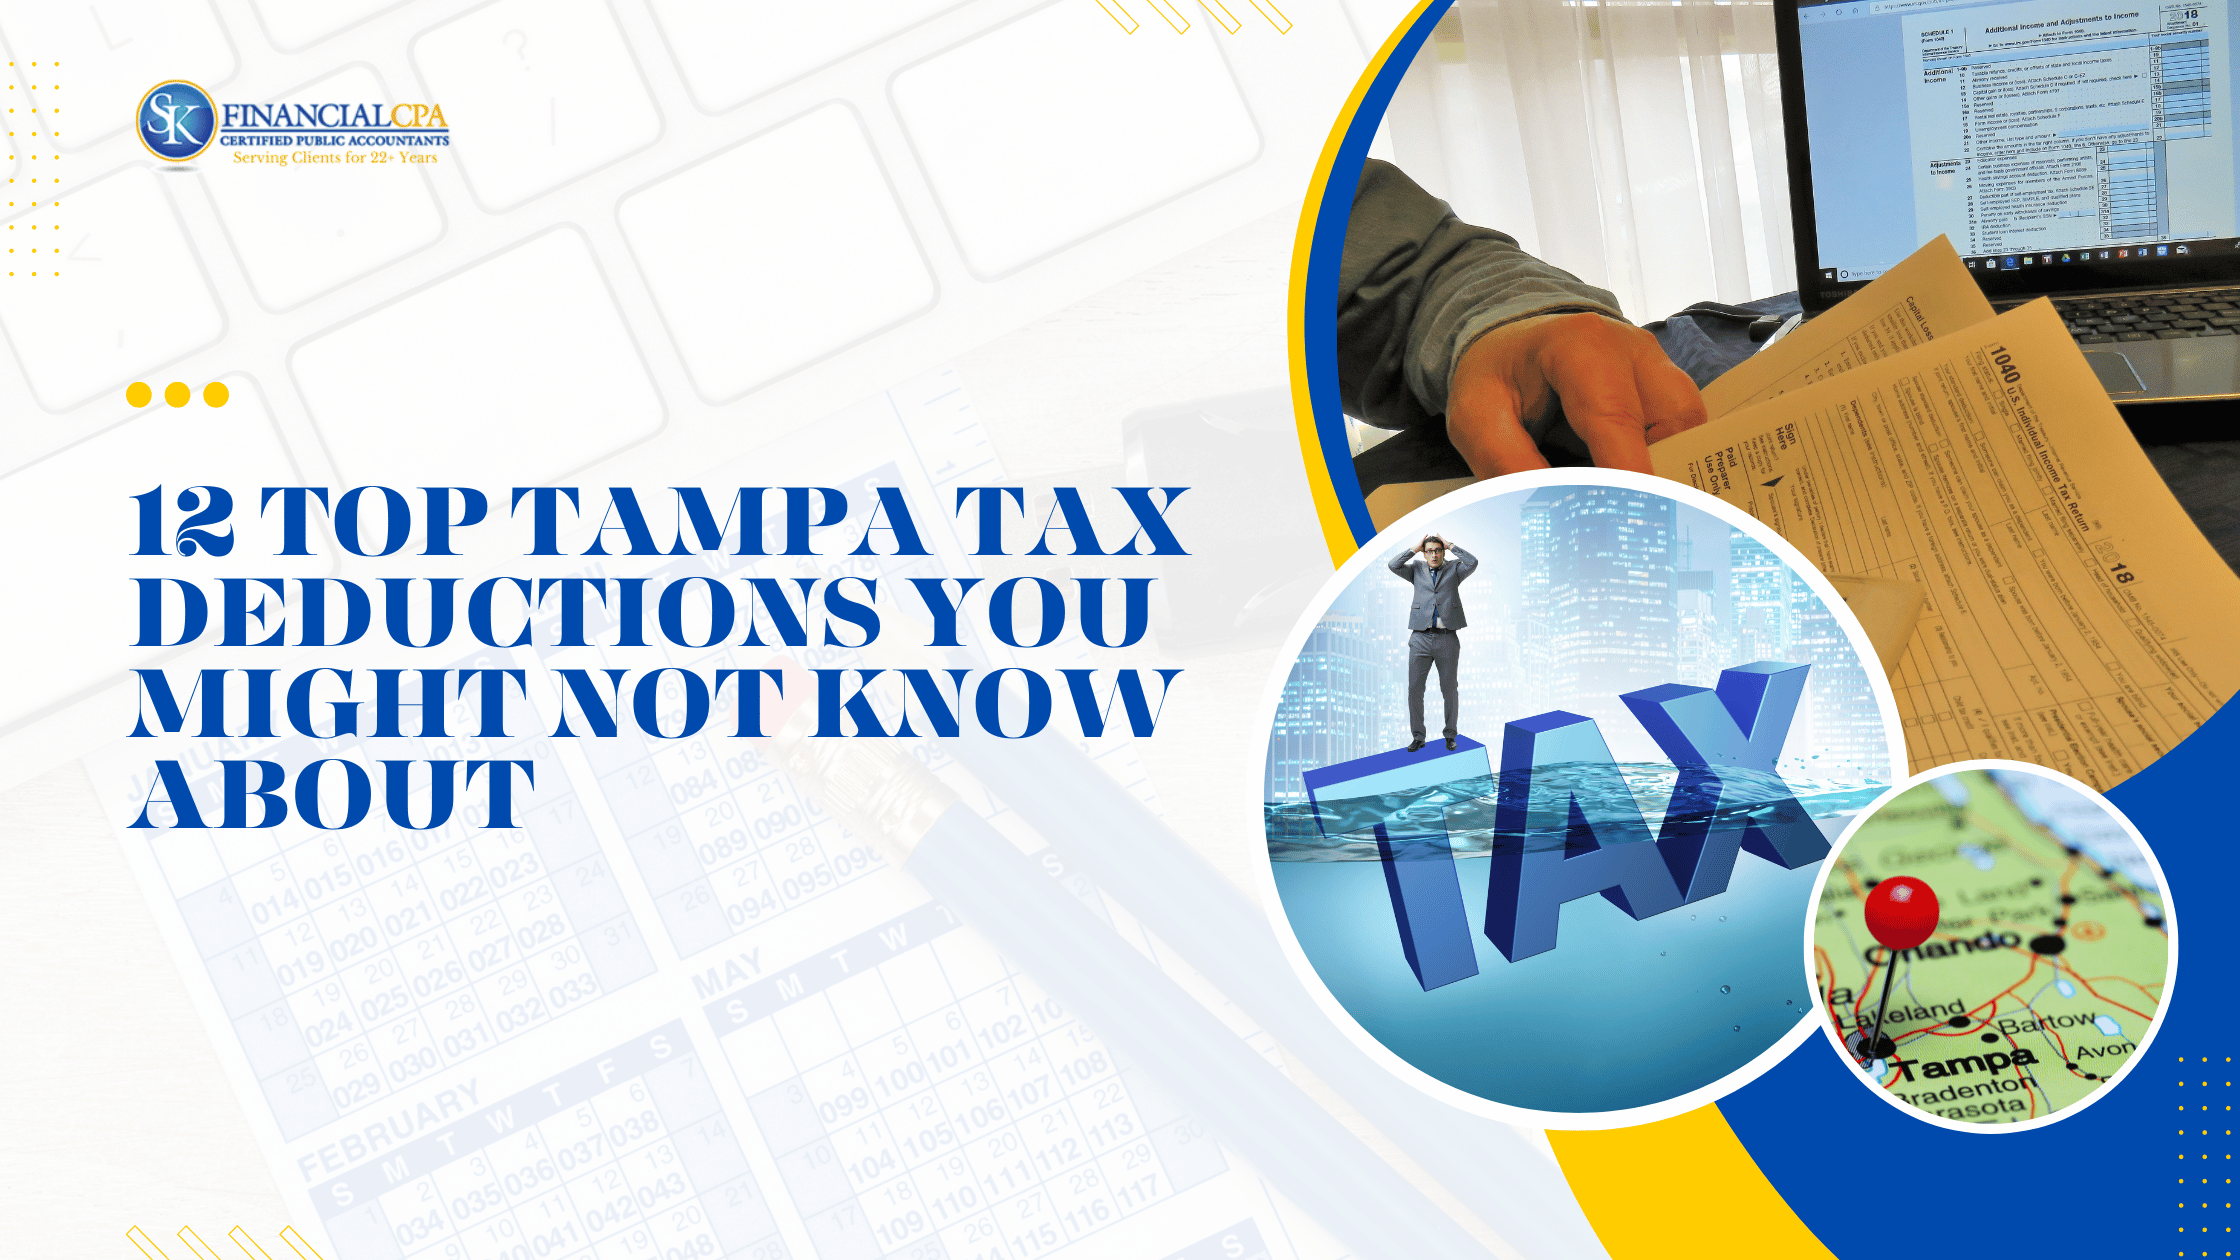 12 Top Tampa Tax Deductions You Might Not Know About